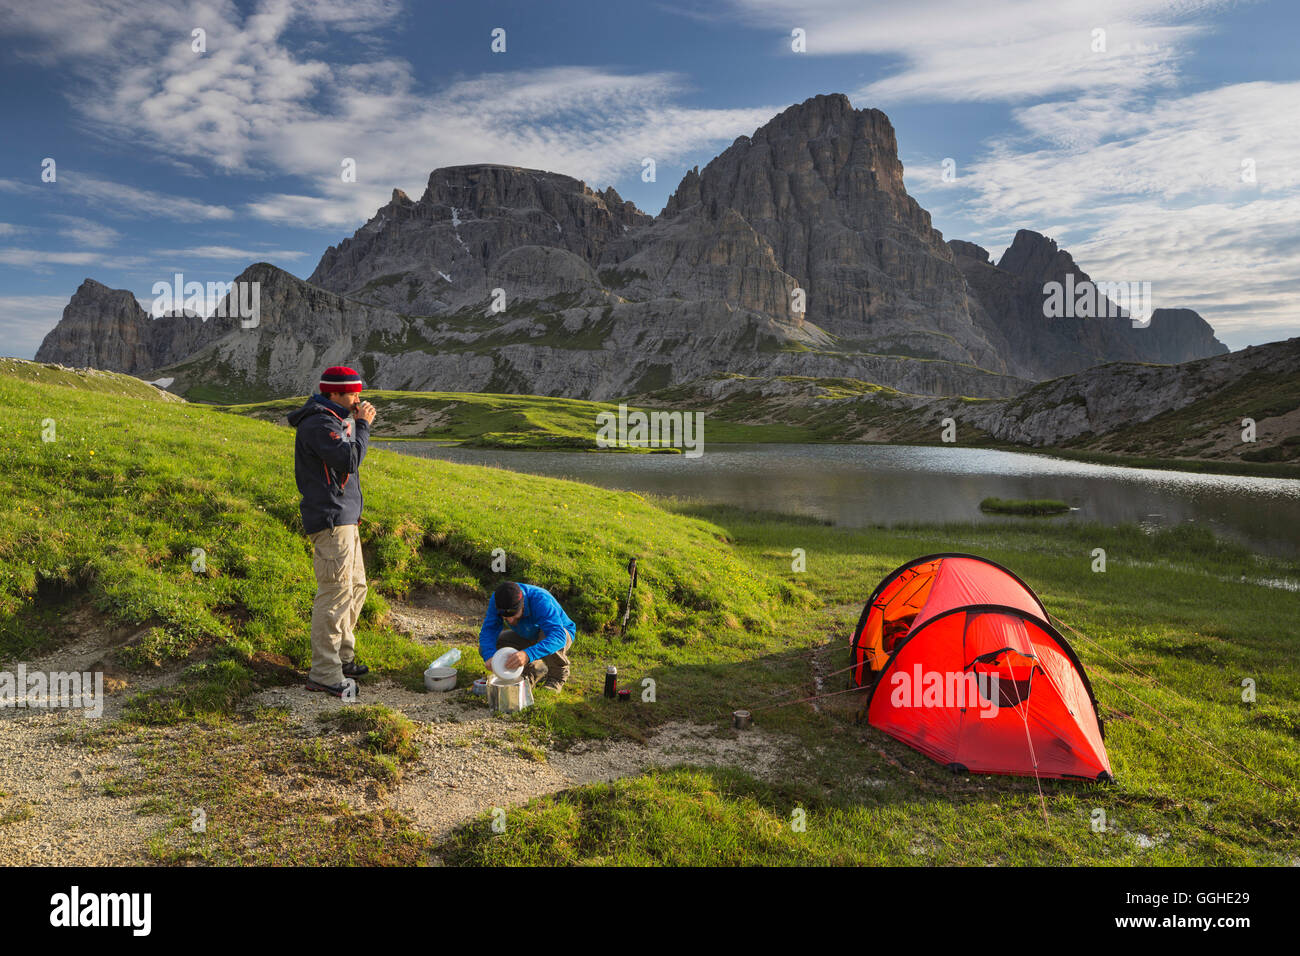 Hikers at Neunerkofel, red tent, Boedenalpe, Bodenseen lake, South Tyrol, Dolomites, Italy Stock Photo